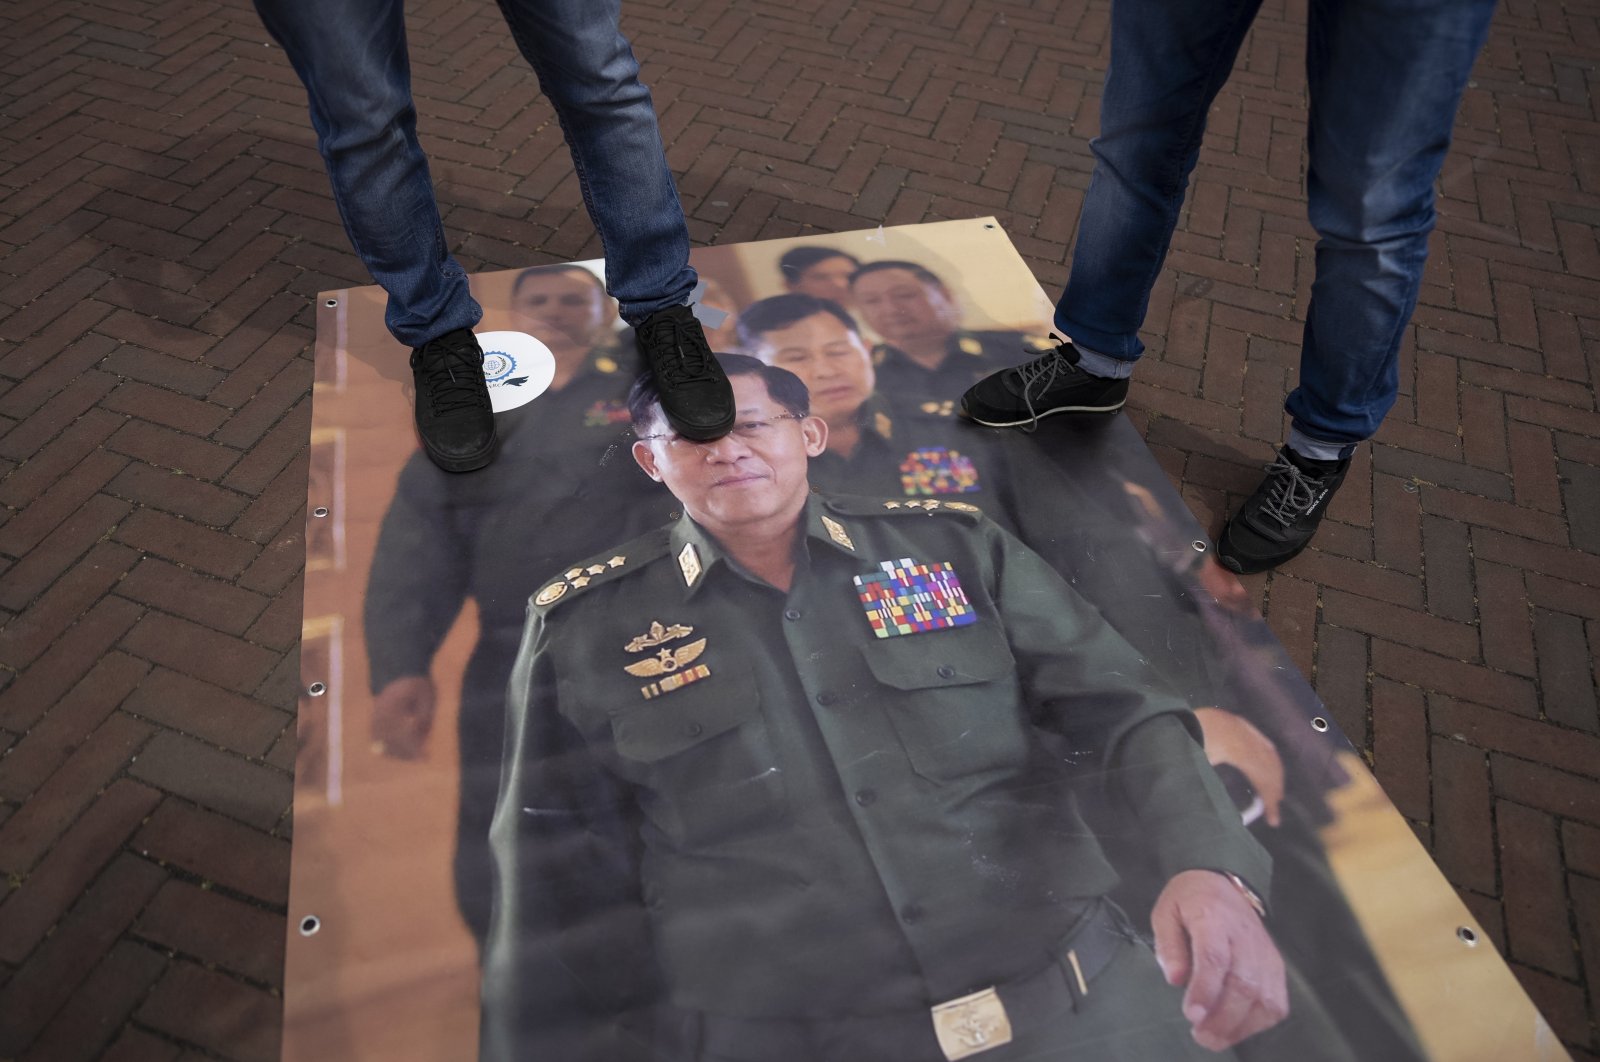 Pro-Rohingya demonstrators step on an image of Myanmar military Gov. Senior Gen. Min Aung Hlaing, outside the International Court of Justice in The Hague, Netherlands, Friday, July 22, 2022. (AP Photo)